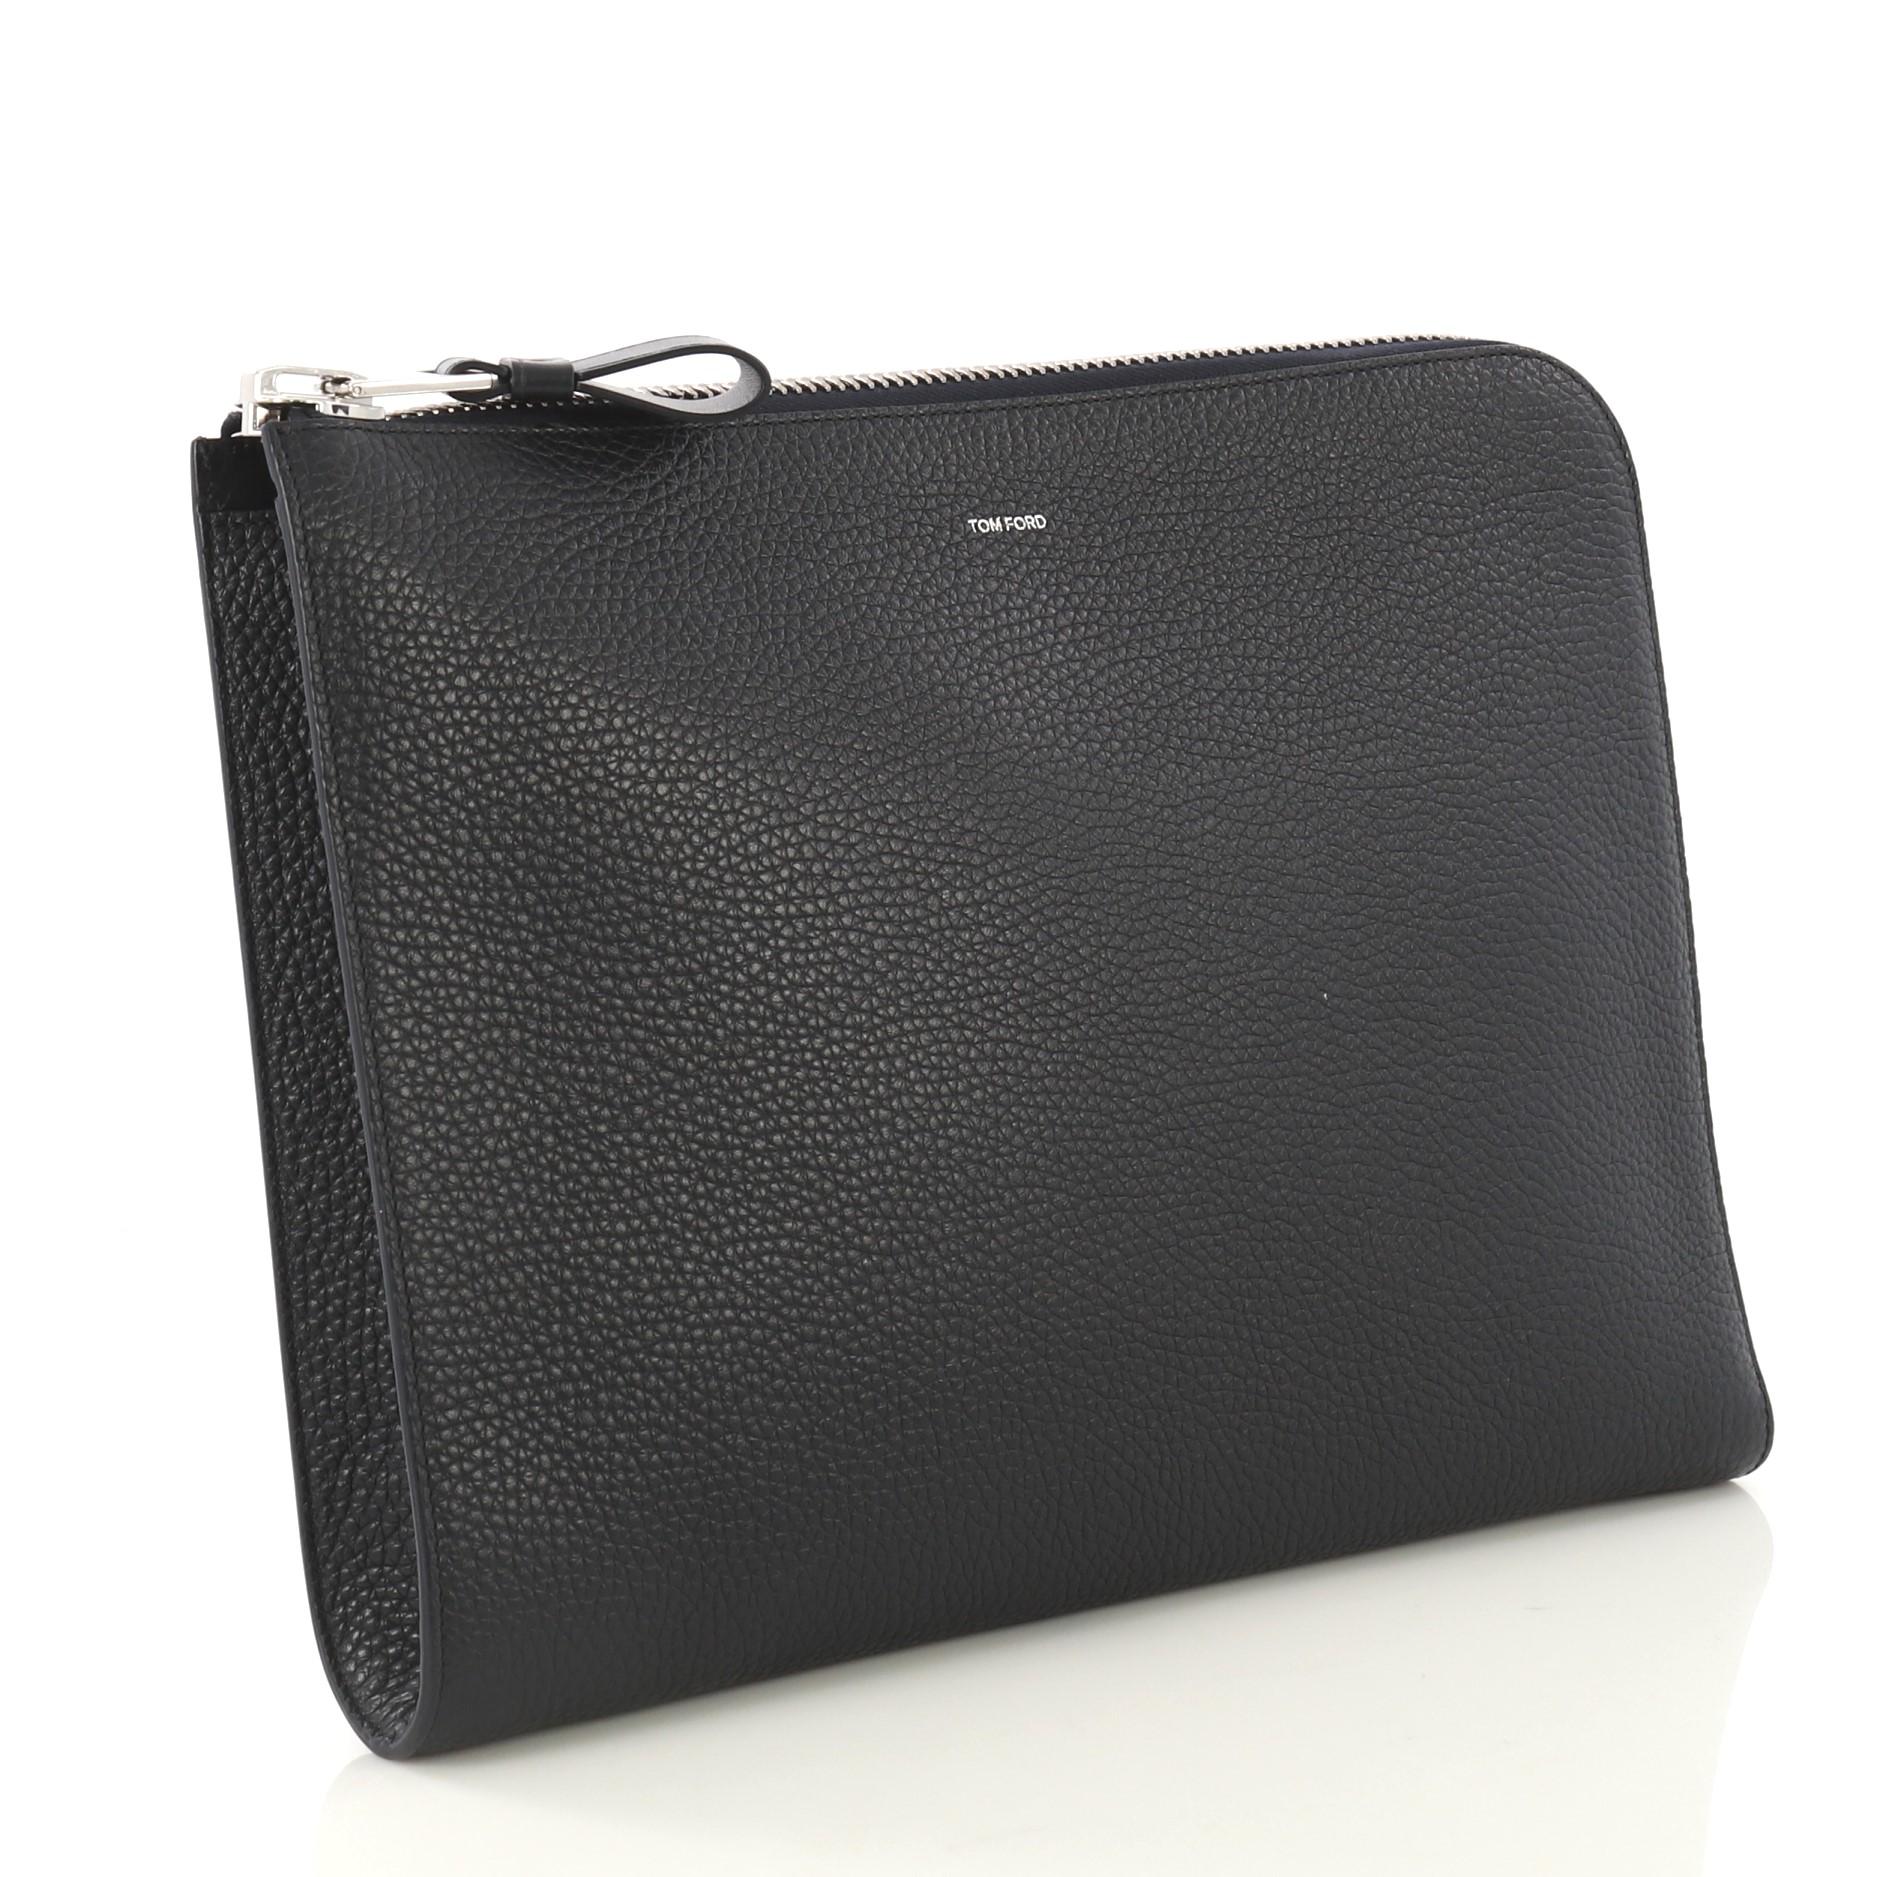 This Tom Ford Buckley Zip Portfolio Leather Medium, crafted from navy blue leather, features silver-tone hardware. Its zip closure opens to a blue leather and black fabric interior with slip pockets. 

Estimated Retail Price: $1,190
Condition: